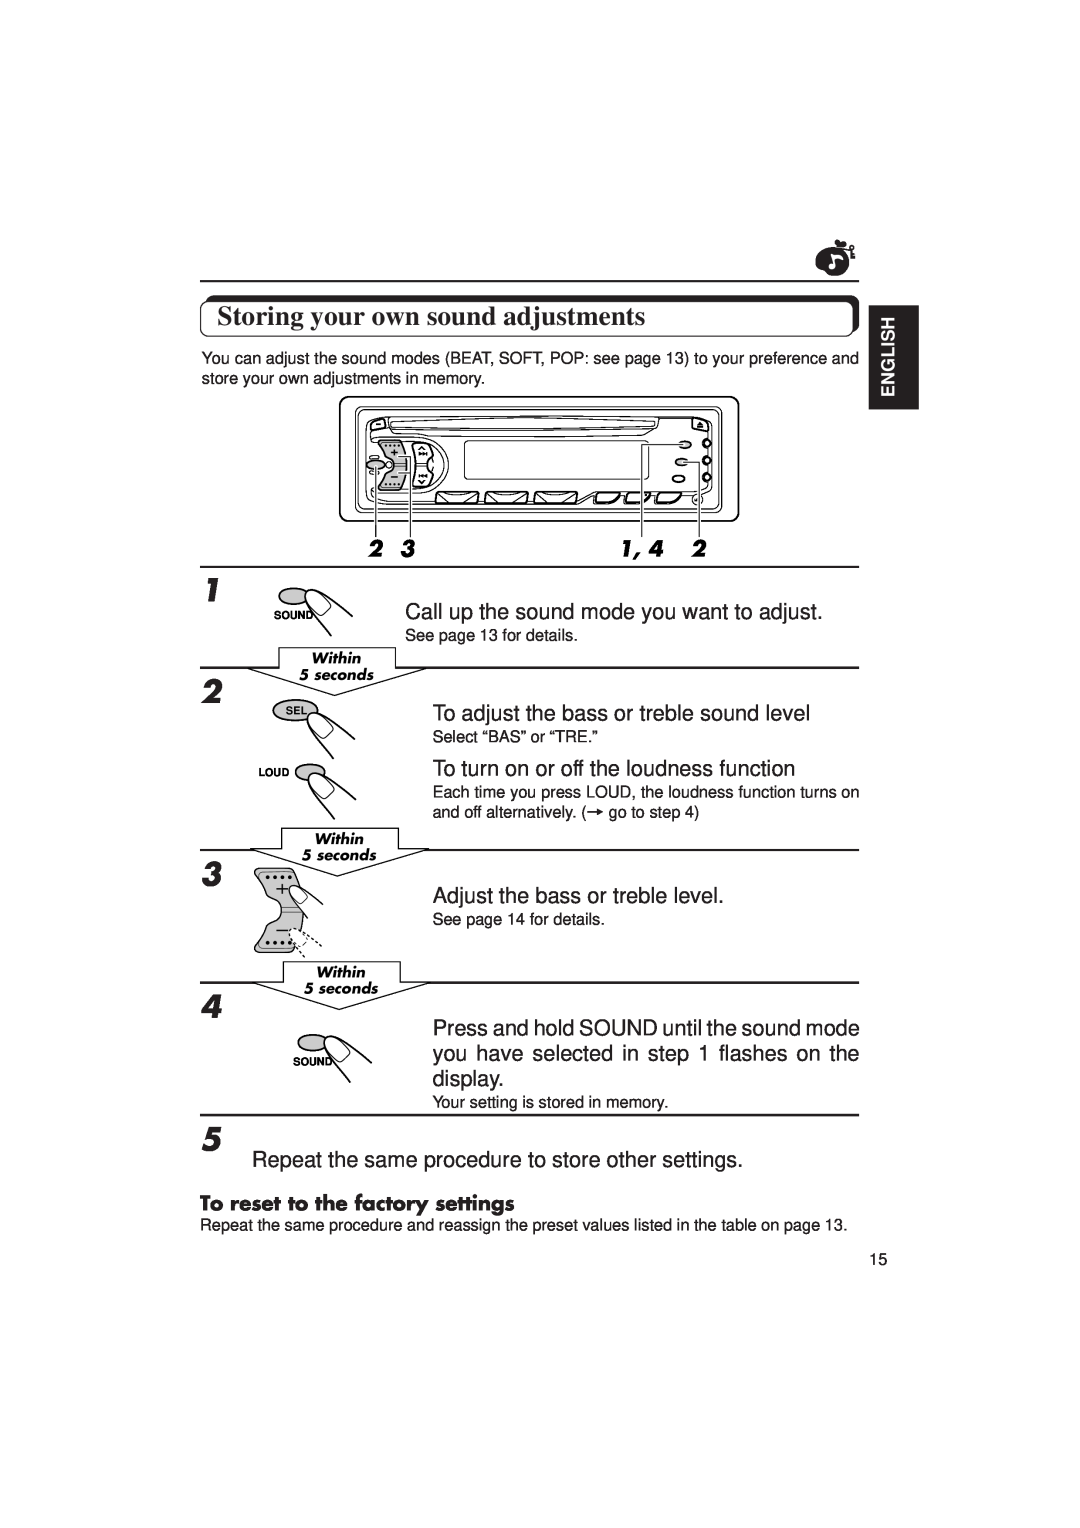 JVC KD-S636 manual Storing your own sound adjustments 